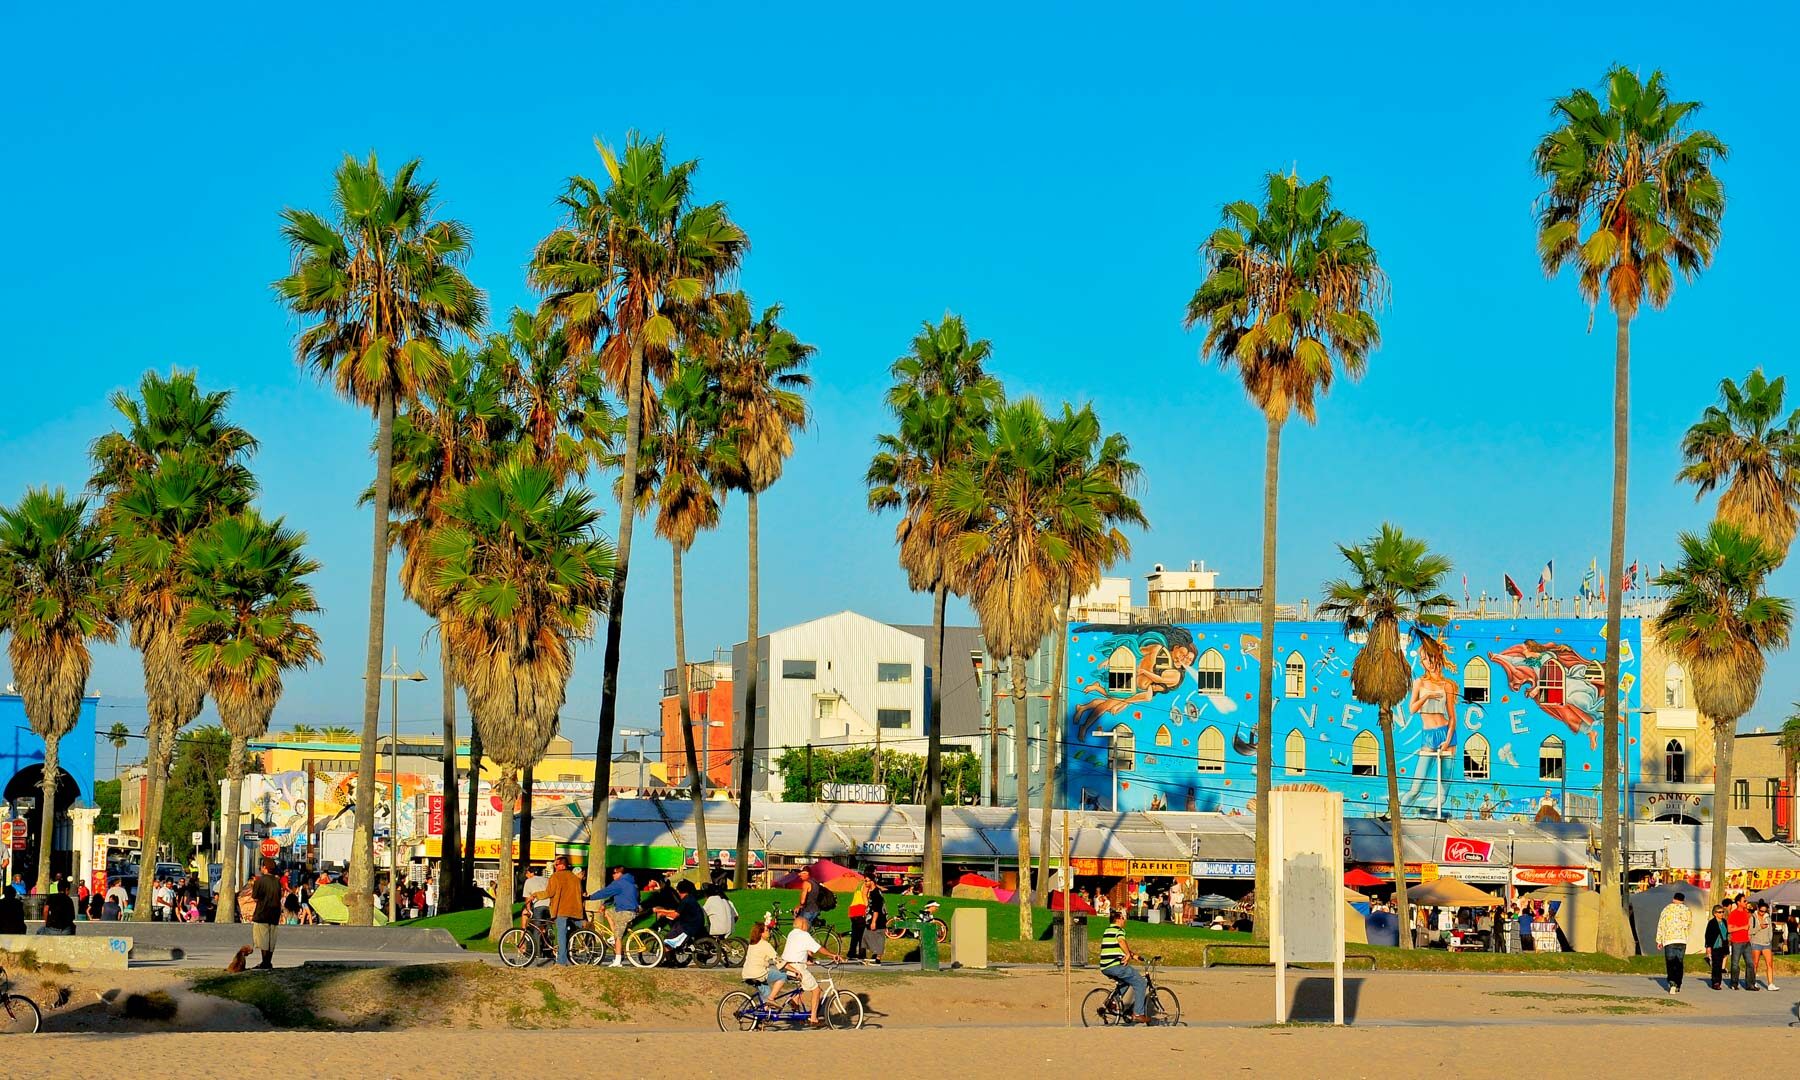 The Best Things to do in Venice Beach, California